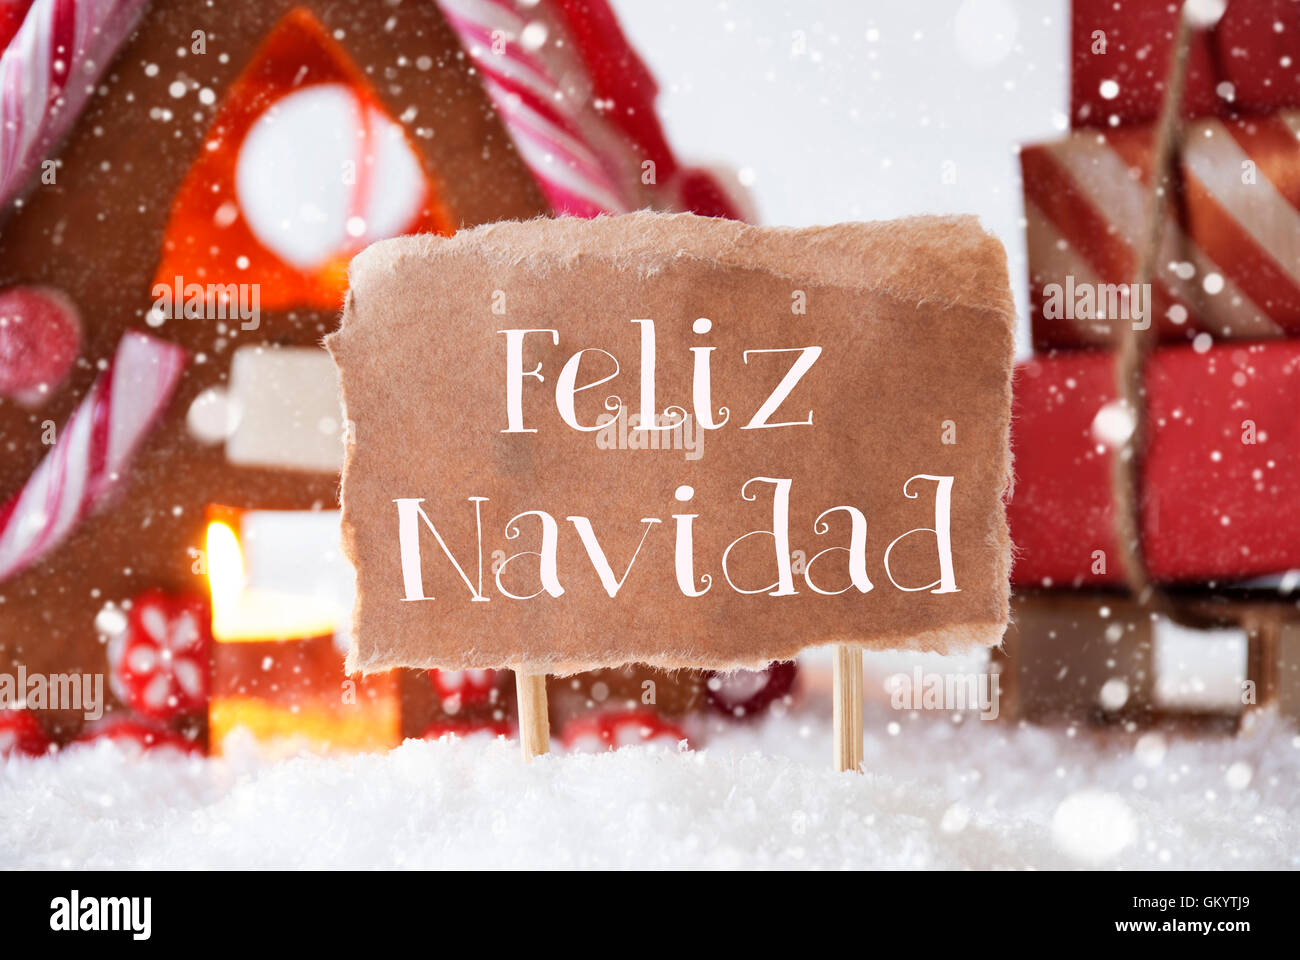 Gingerbread House With Sled, Snowflakes, Feliz Navidad Means Merry Christmas Stock Photo